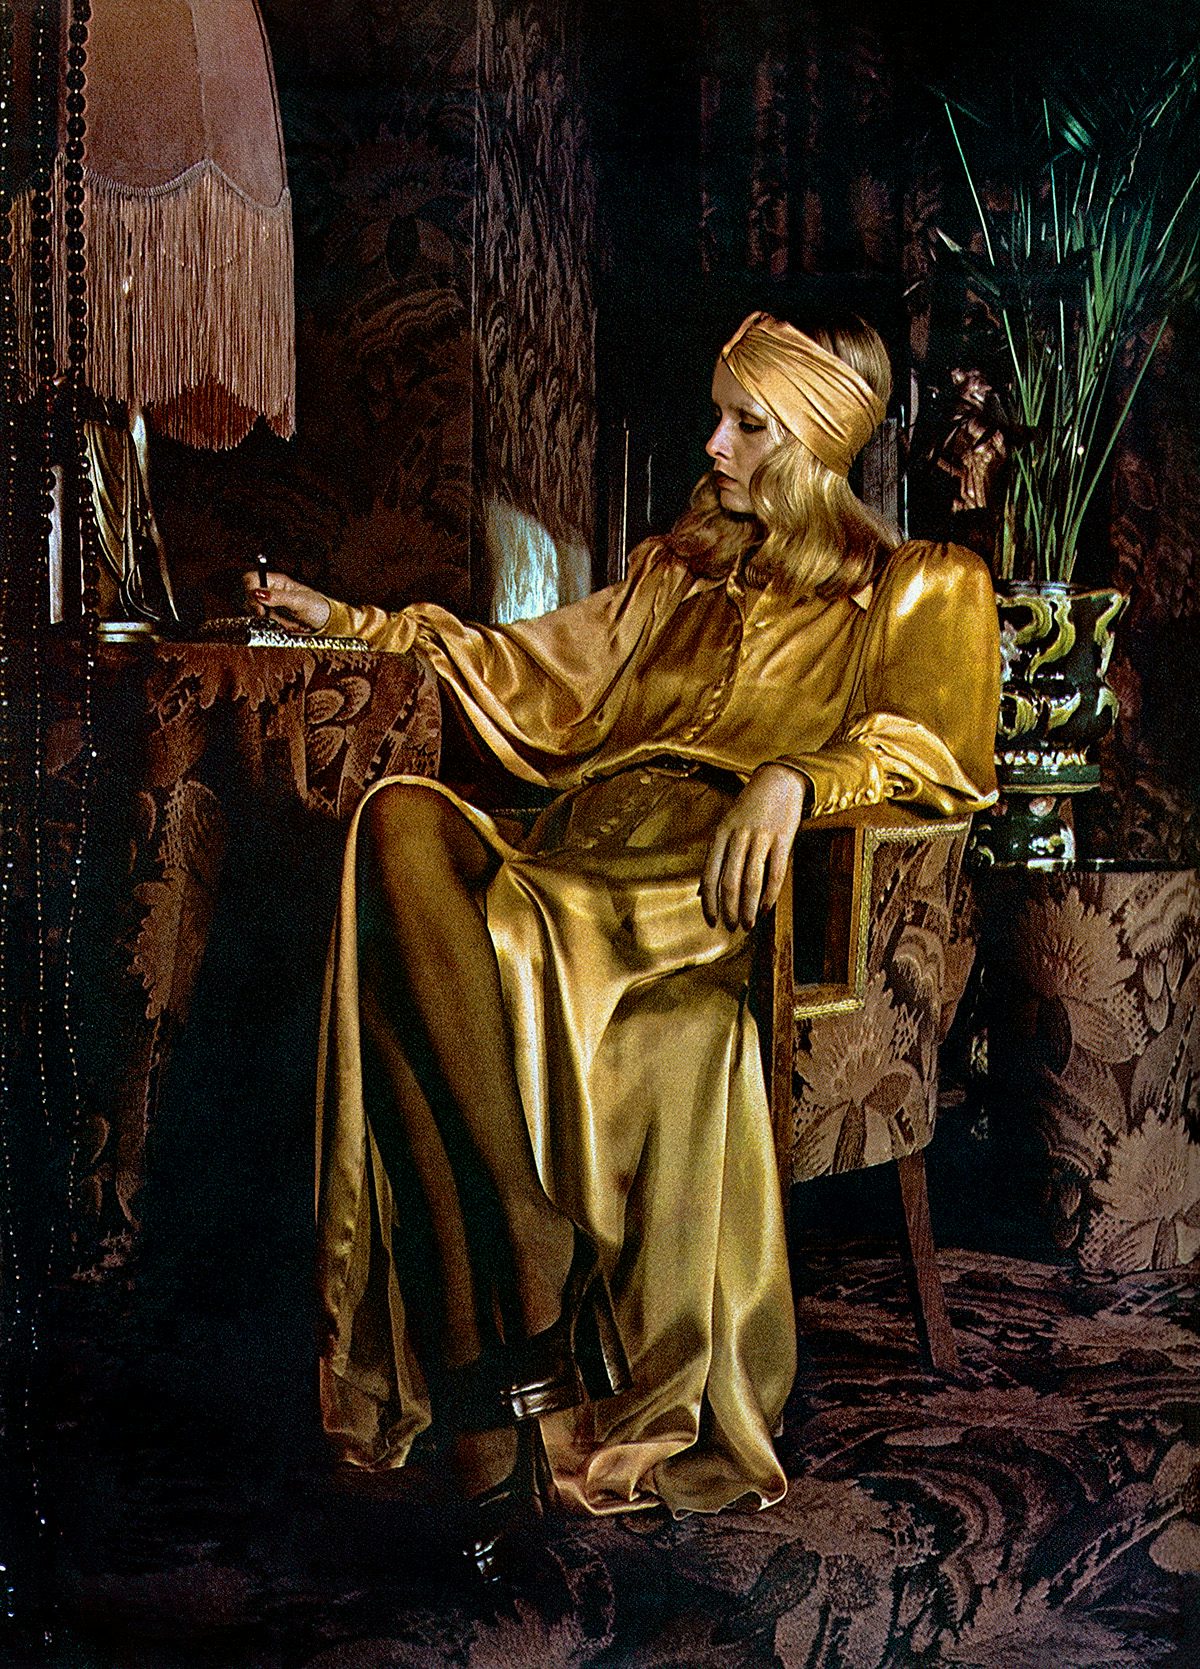 Photograph of the model Twiggy wearing a gold satin dress and headband sat on a chair in an ornate 70s patterned room